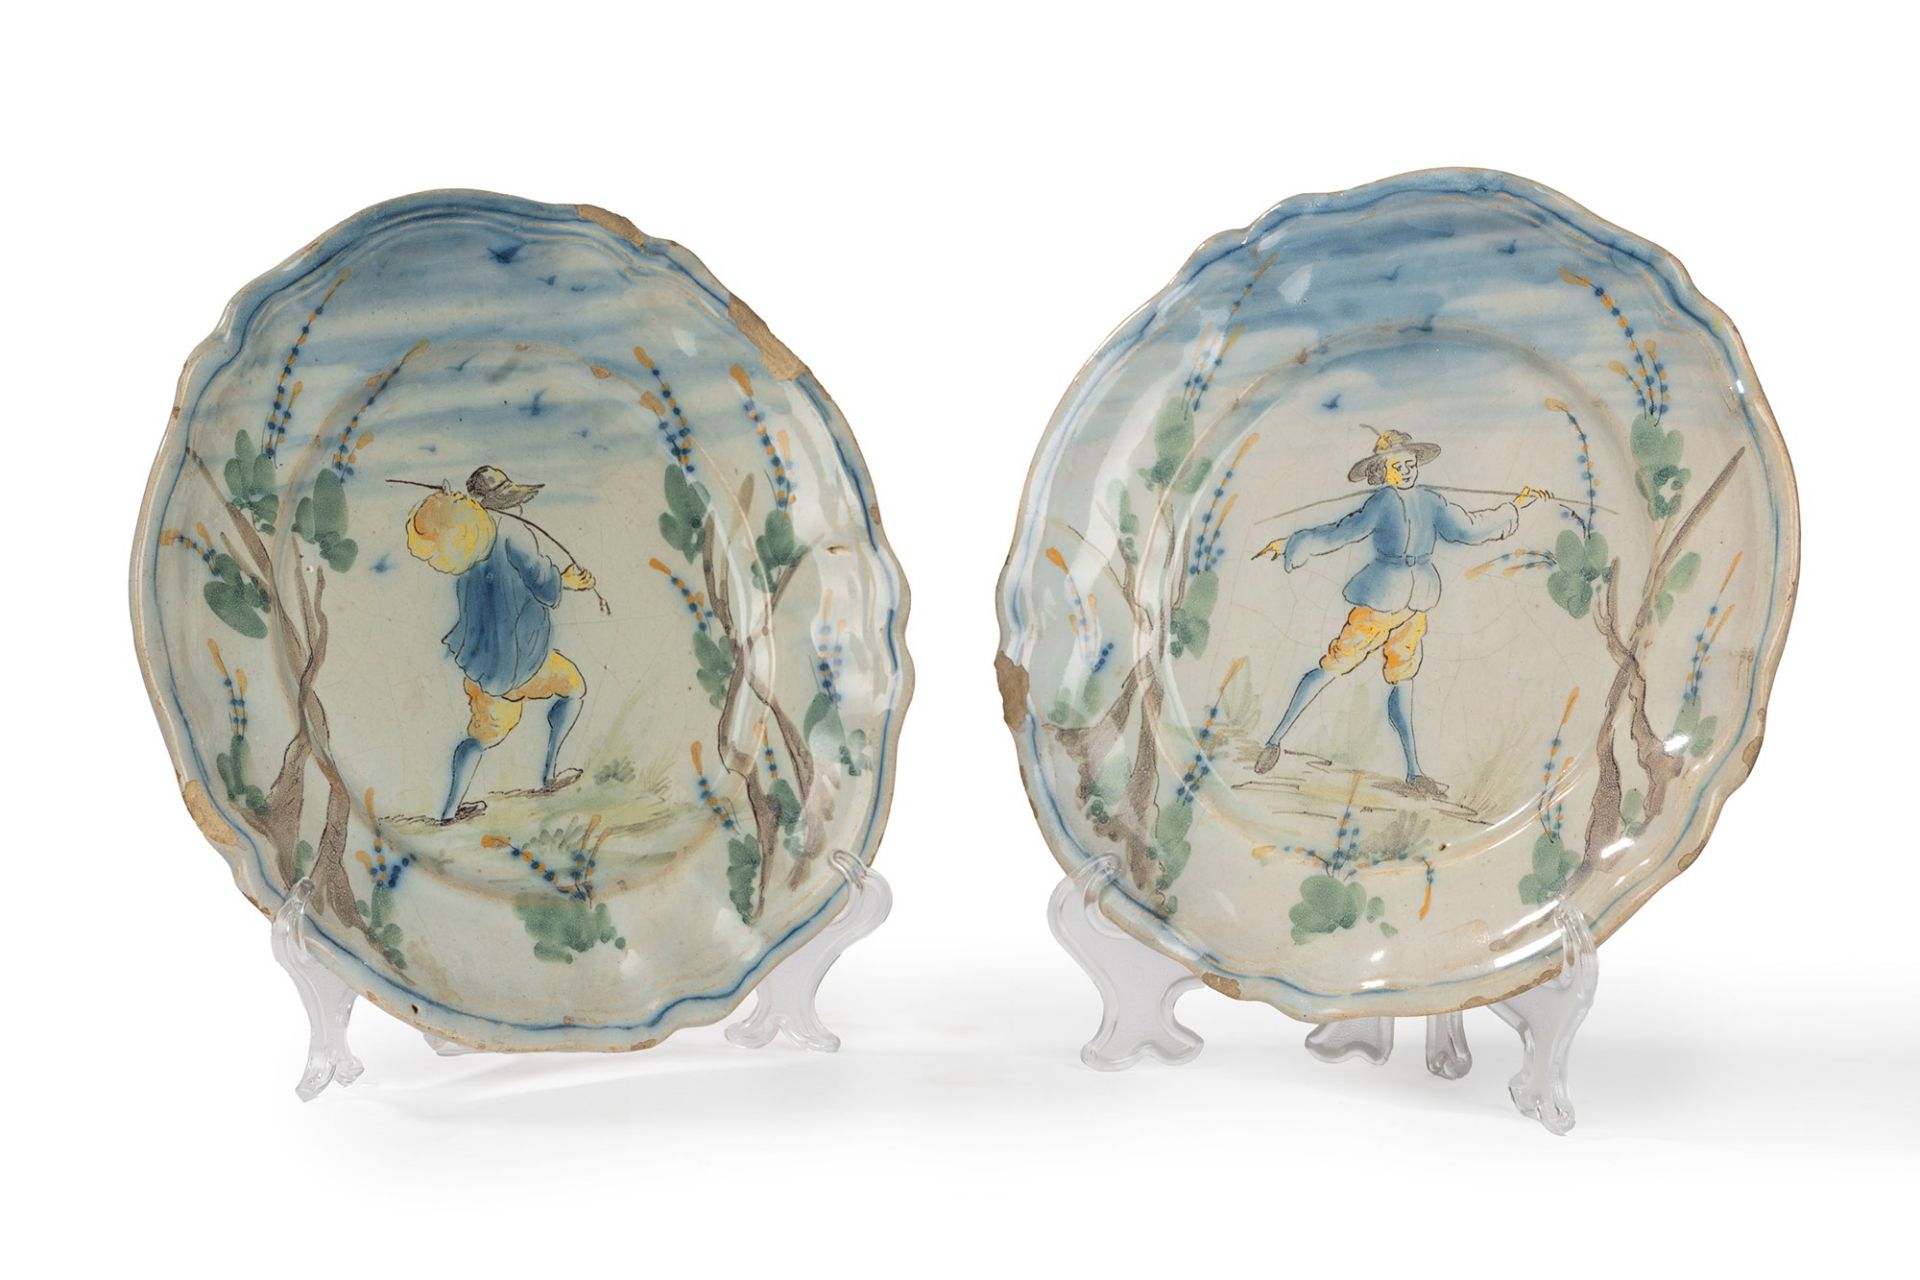 Jacques Boselly, known as Giacomo Boselli (Savona 23/06/202-1808) - Two painted majolica plates wit